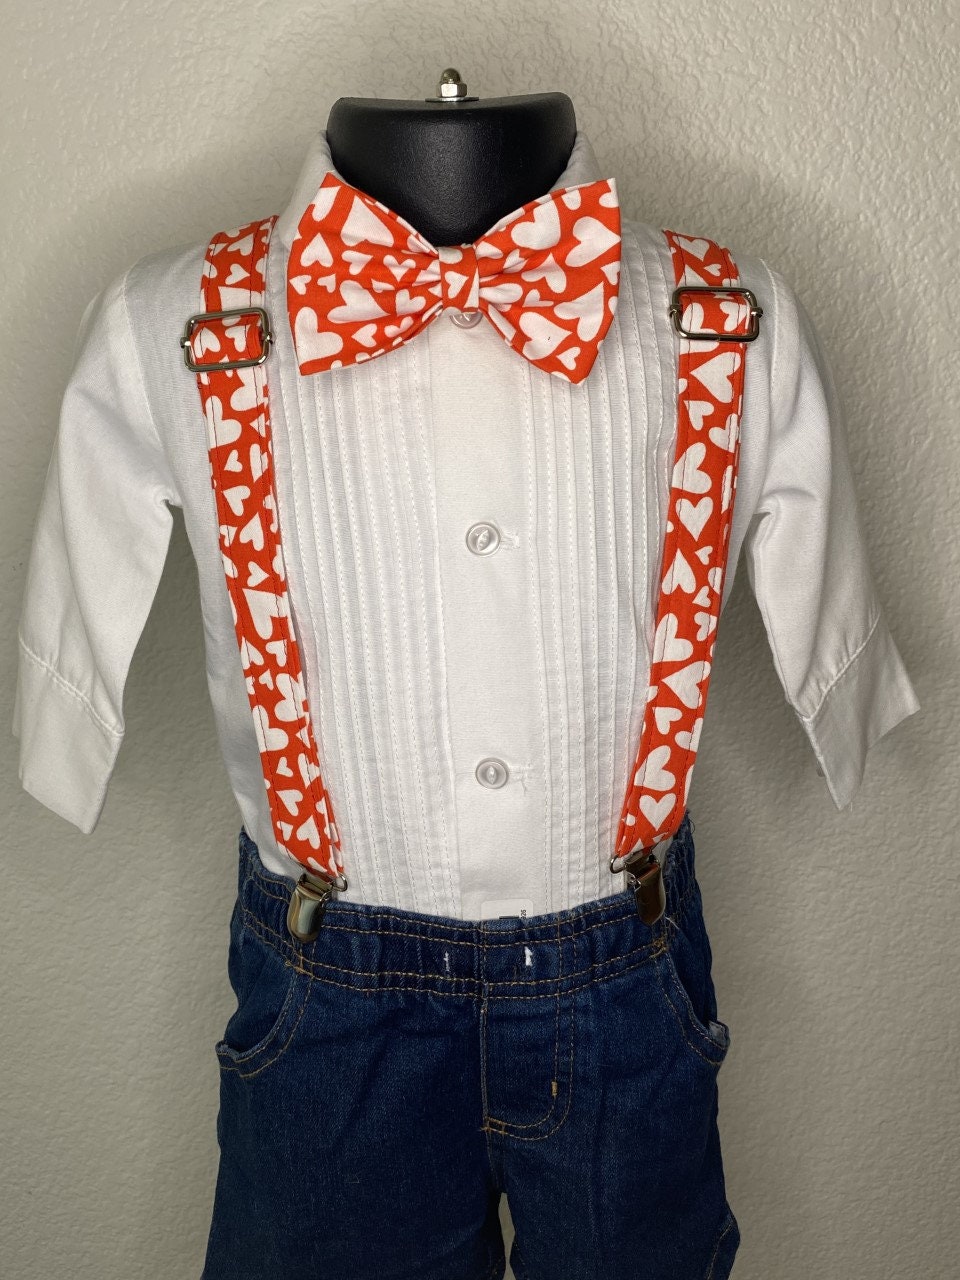 Red and white hearts bow tie and suspenders custom adjustable Velcro birthday outfit photo prop bowtie Wedding special occasion church